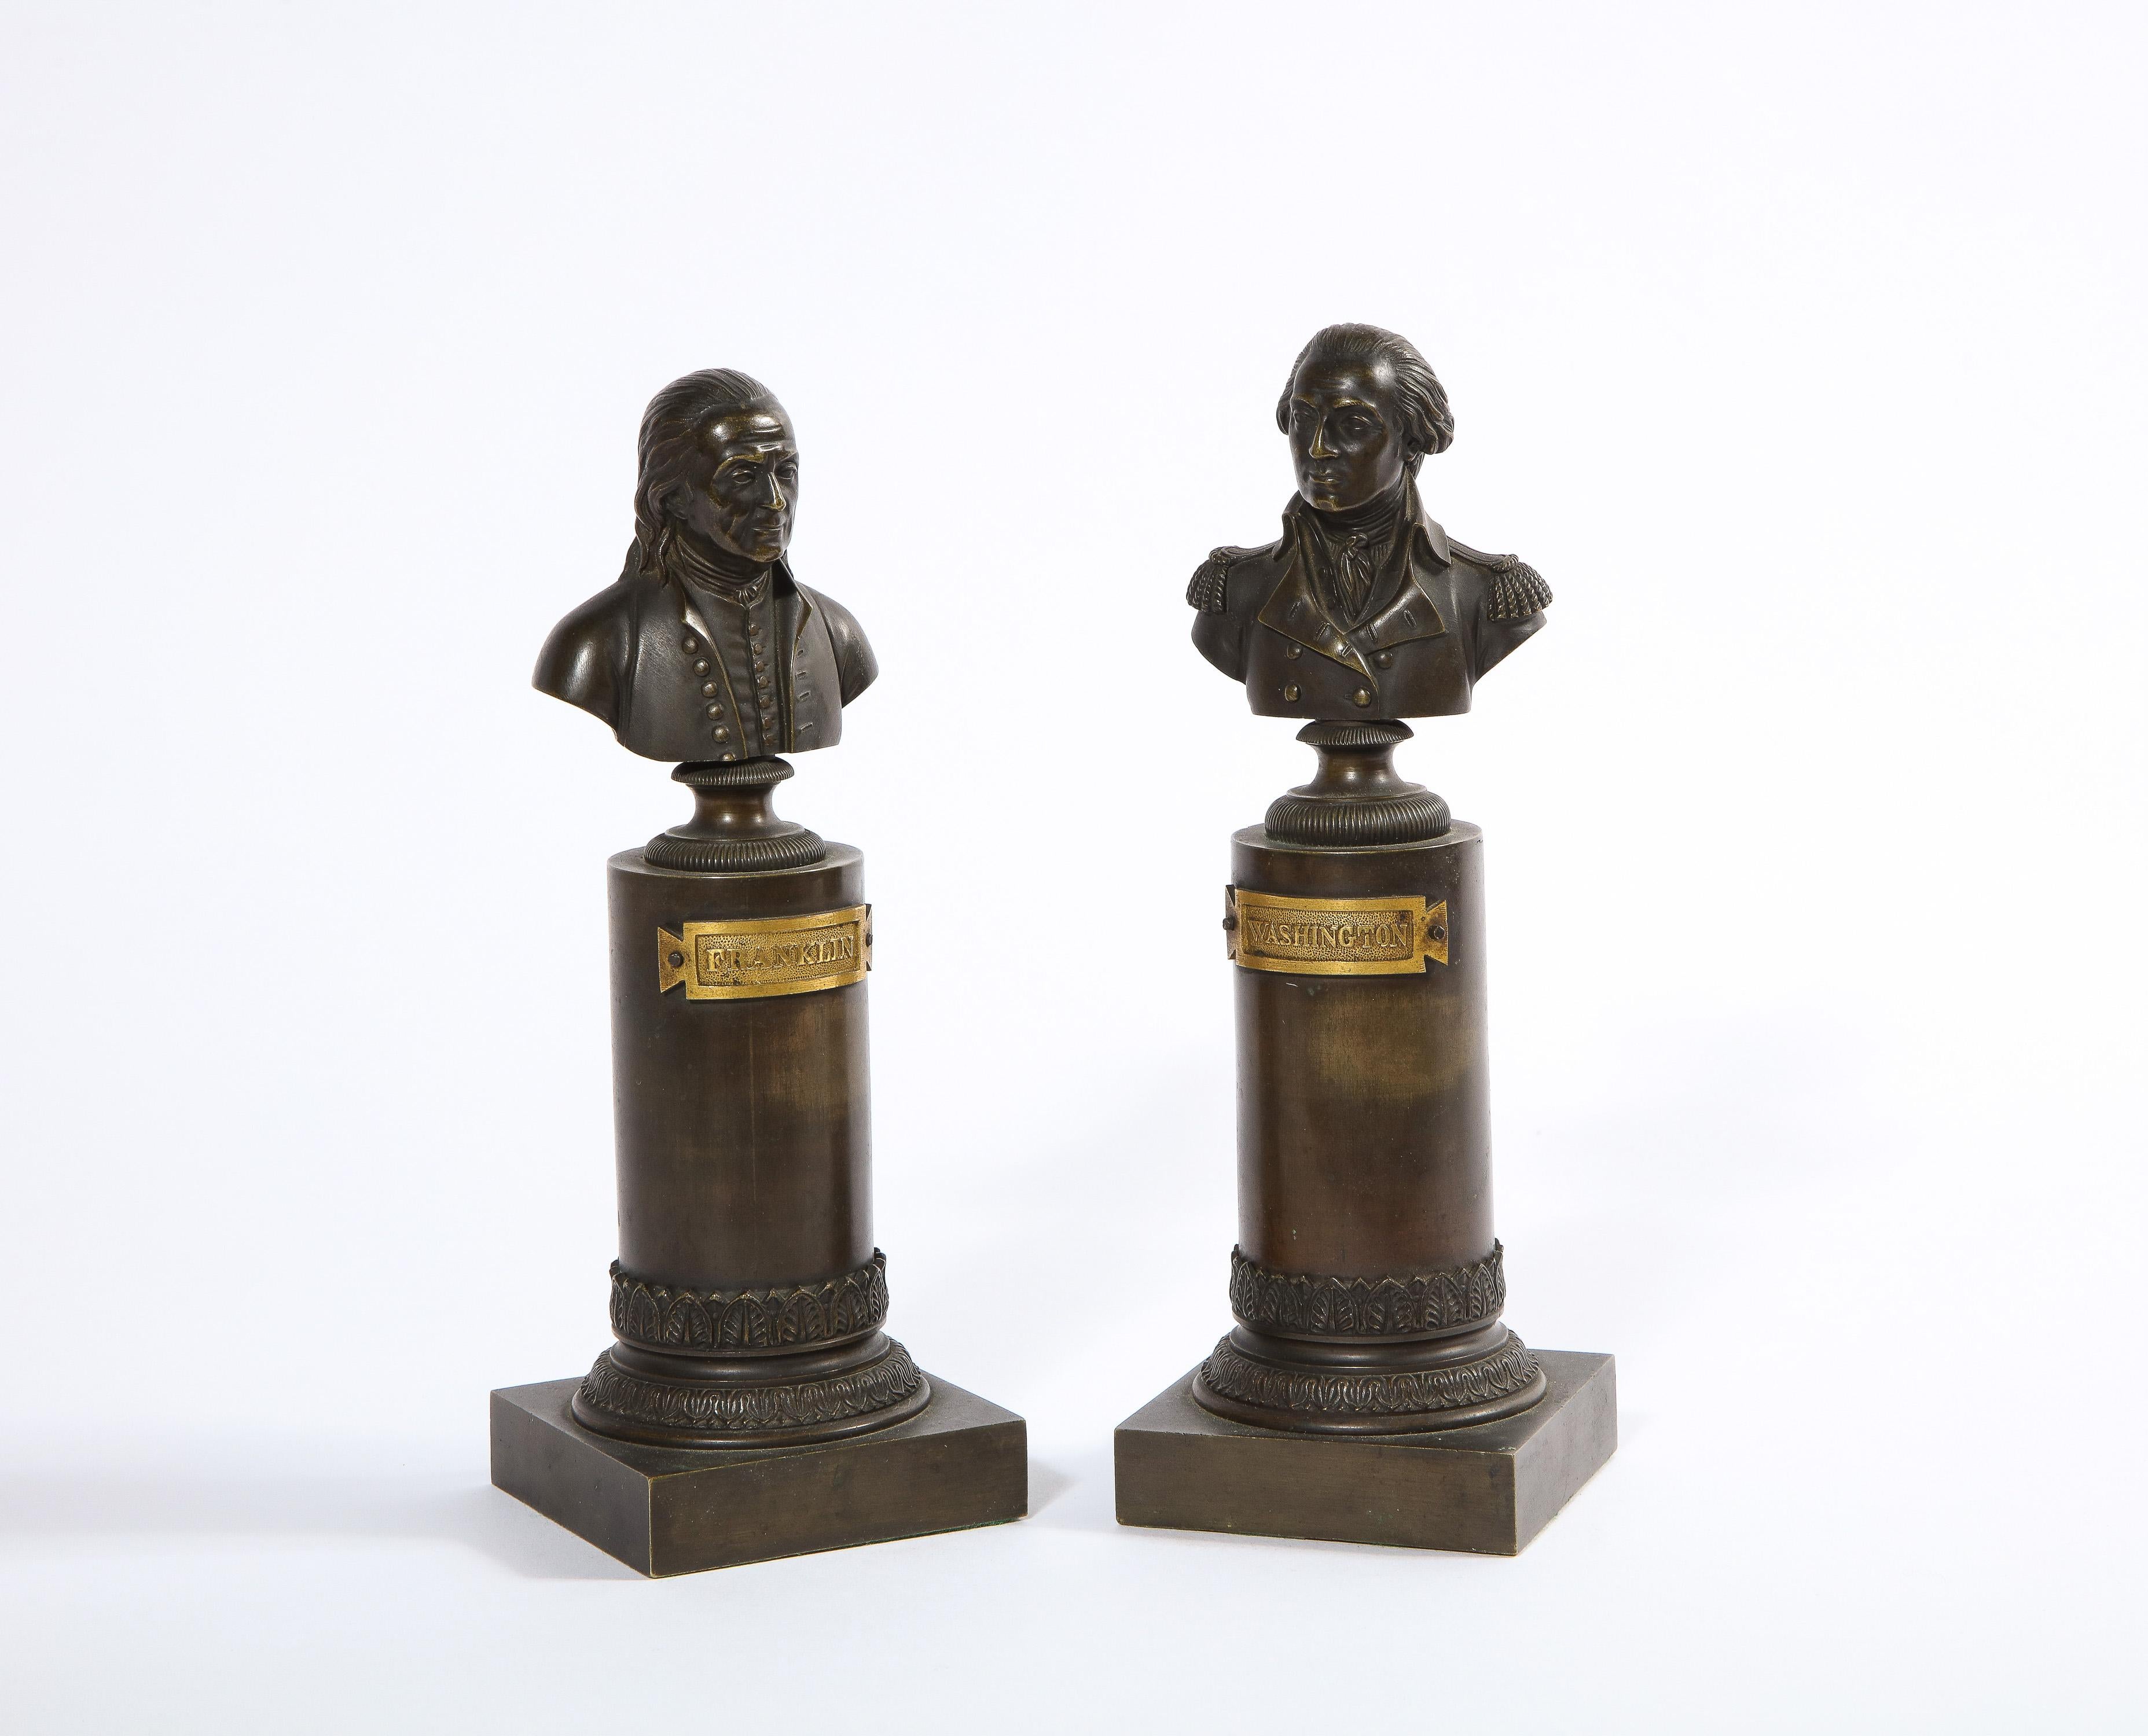 American Classical Rare Pair of American Bronze Busts of George Washington and Benjamin Franklin